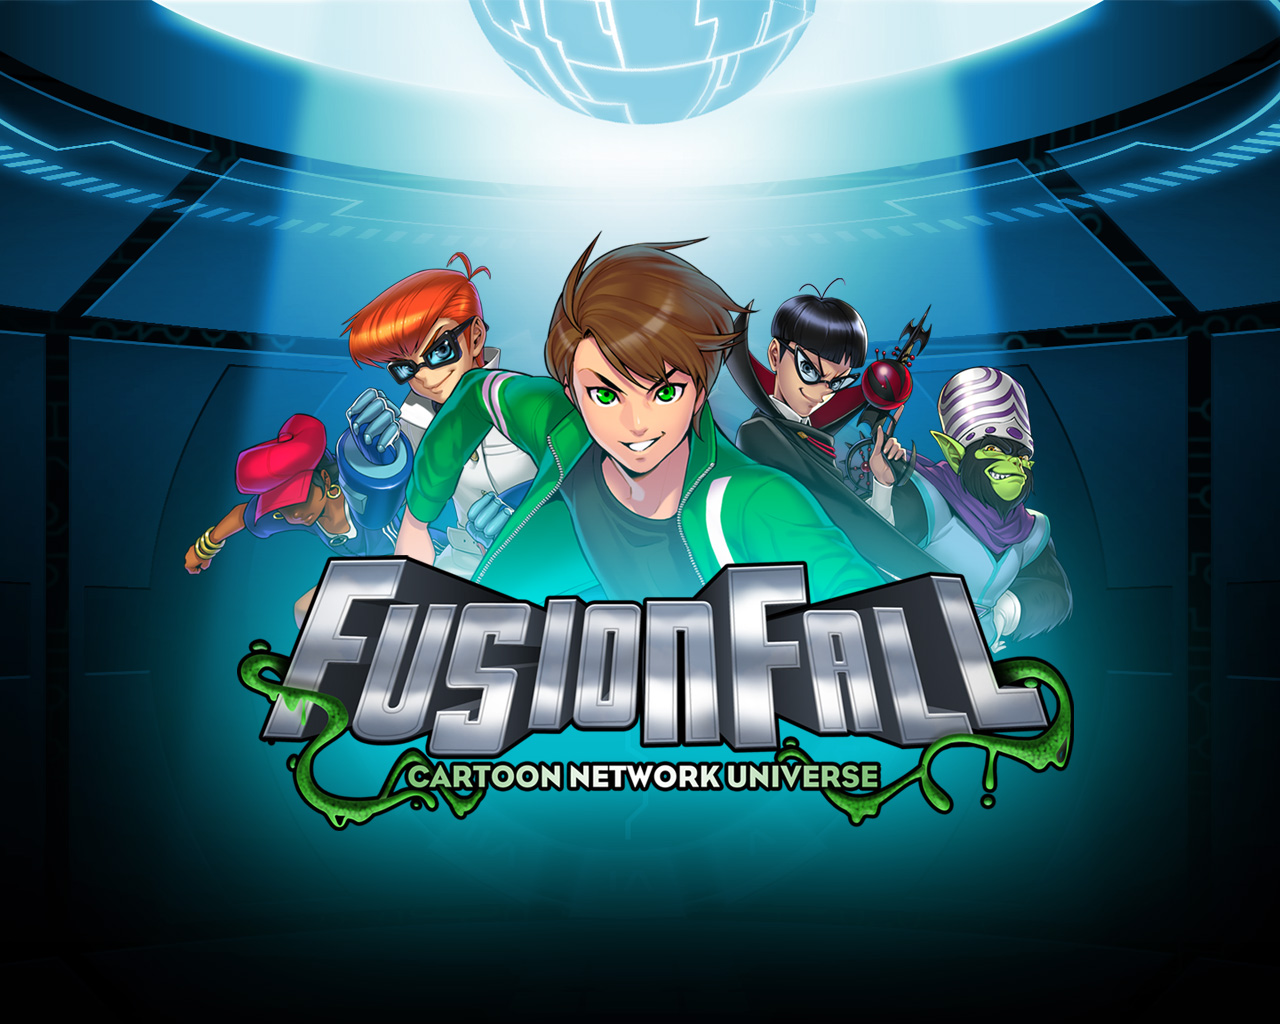 fusionfall legacy demo download